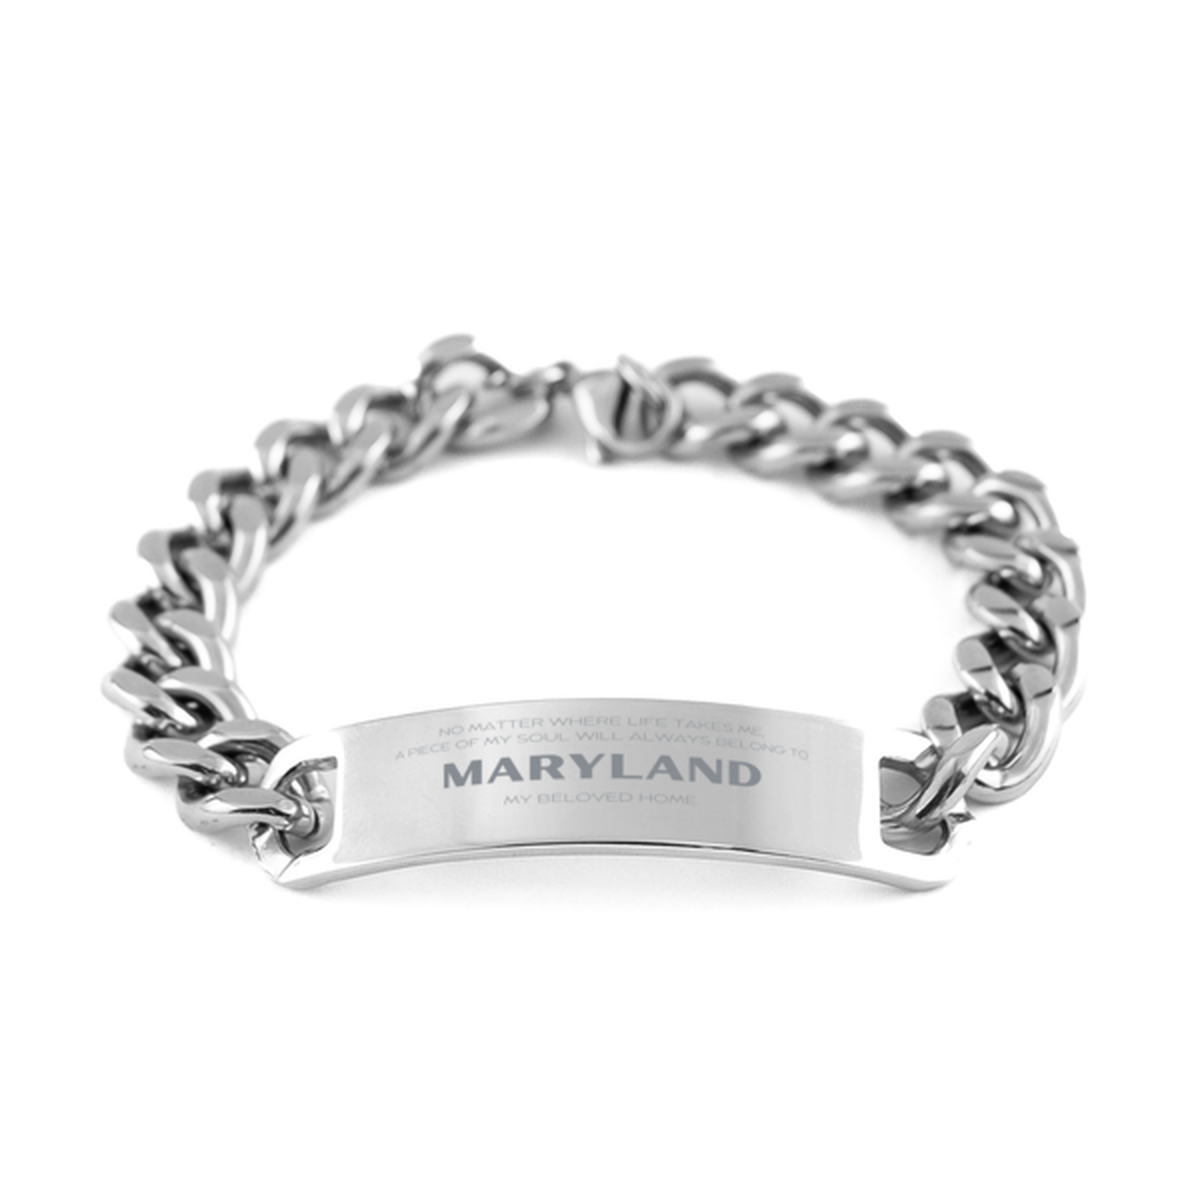 Love Maryland State Gifts, My soul will always belong to Maryland, Proud Cuban Chain Stainless Steel Bracelet, Birthday Unique Gifts For Maryland Men, Women, Friends